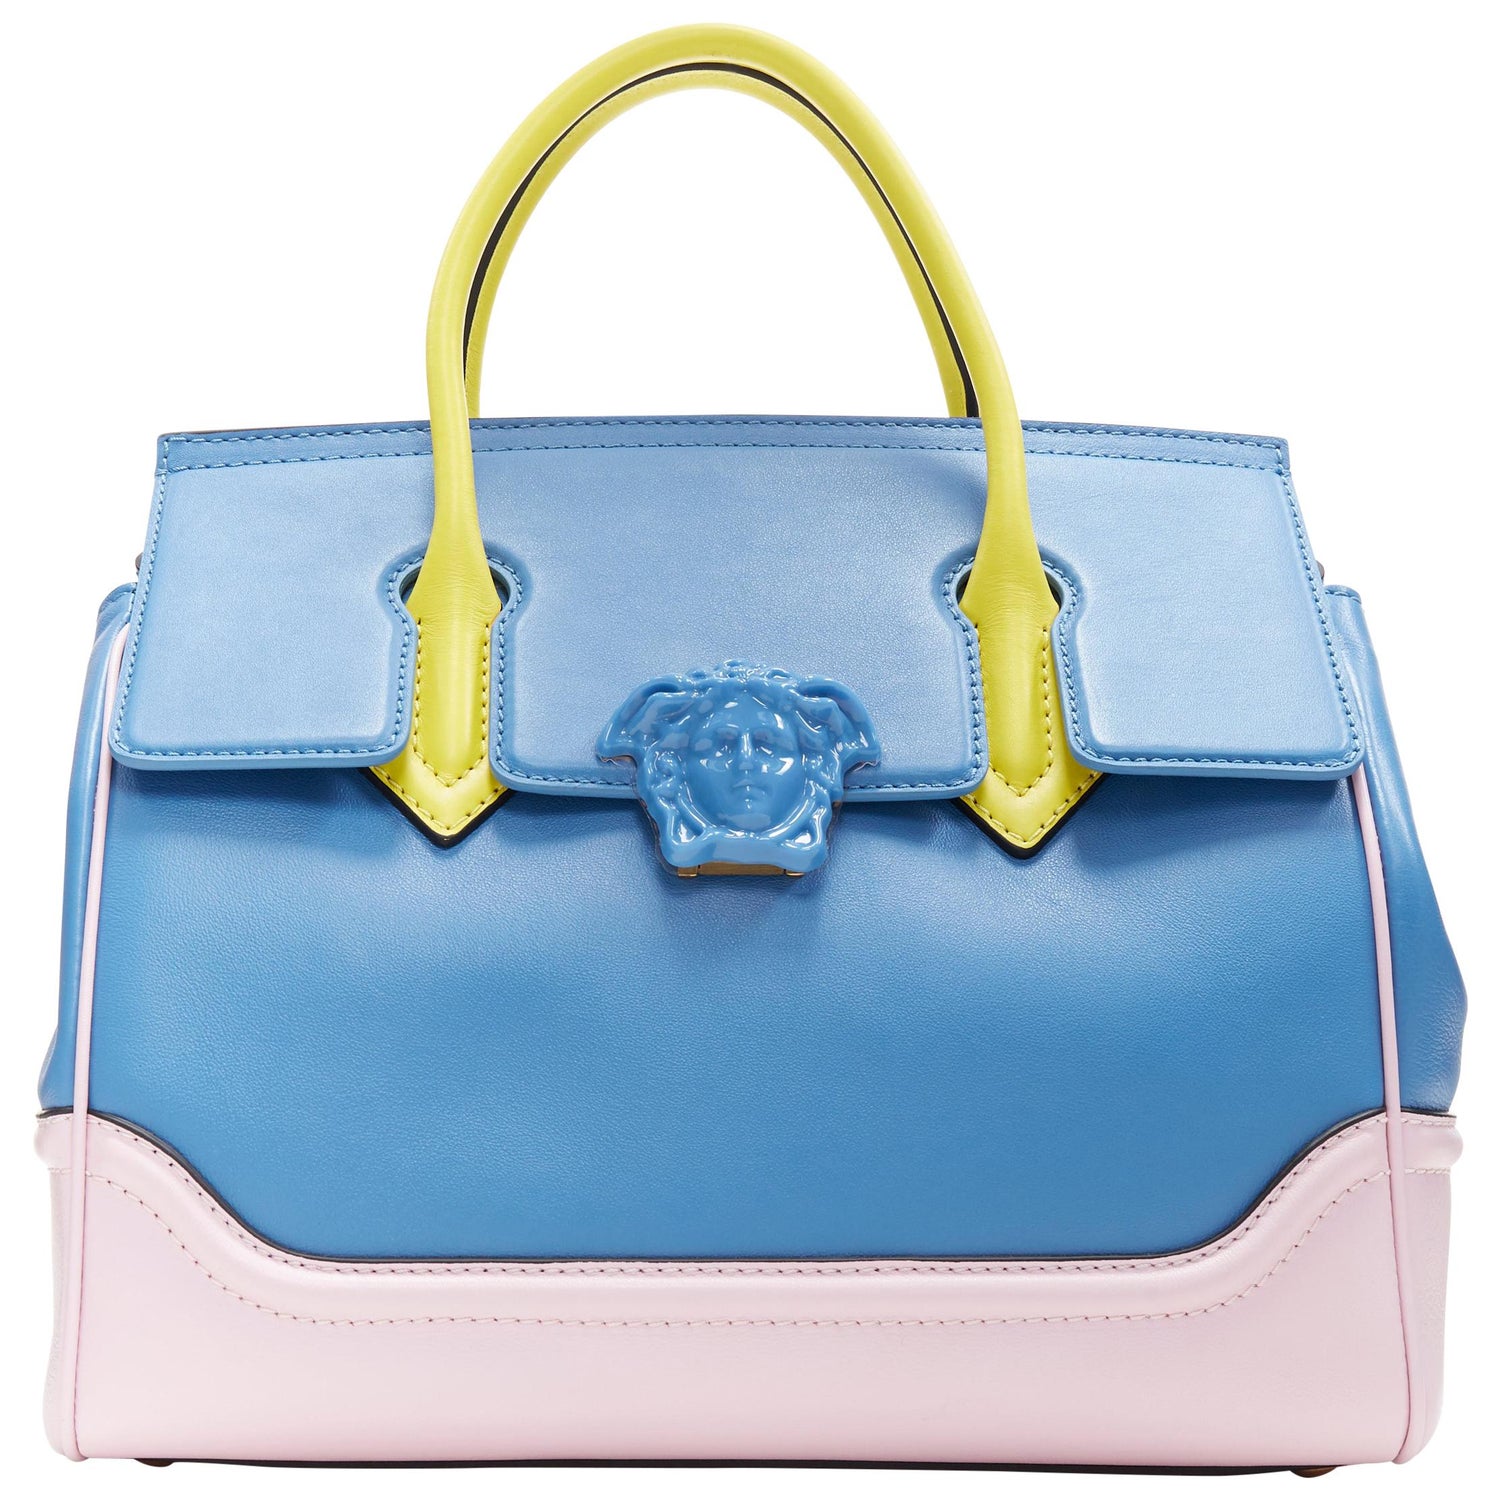 Versace Empire Palazzo Large - For Sale on 1stDibs | versace palazzo empire  bag, versace empire palazzo bag, versace palazzo empire bag large